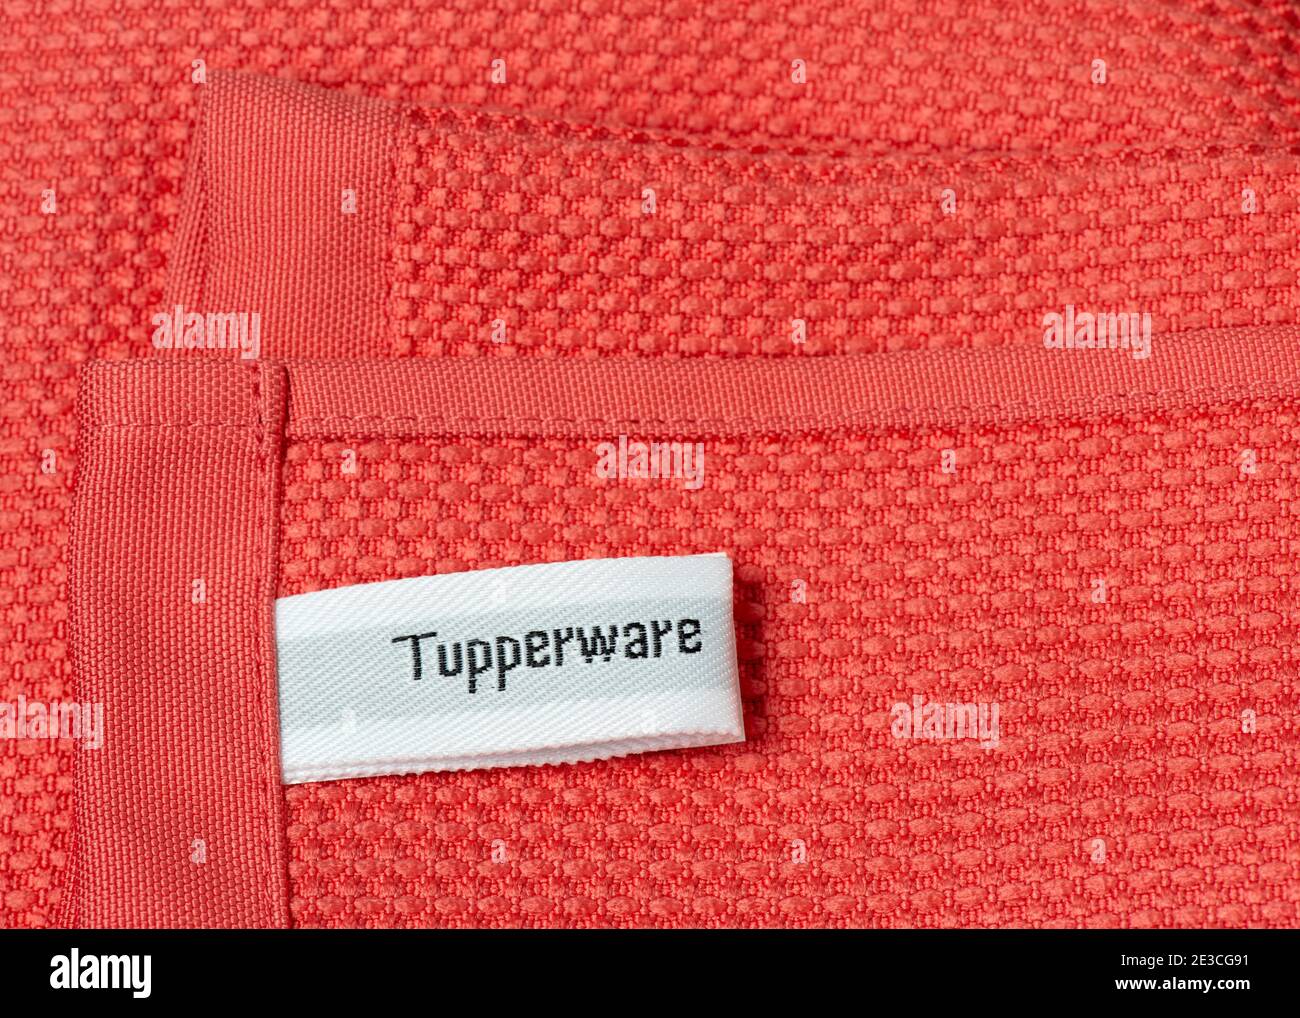 Tupperware writing logo sign label on pink microfiber cleaning cloth. Tupperware Brands home products. Stock Photo